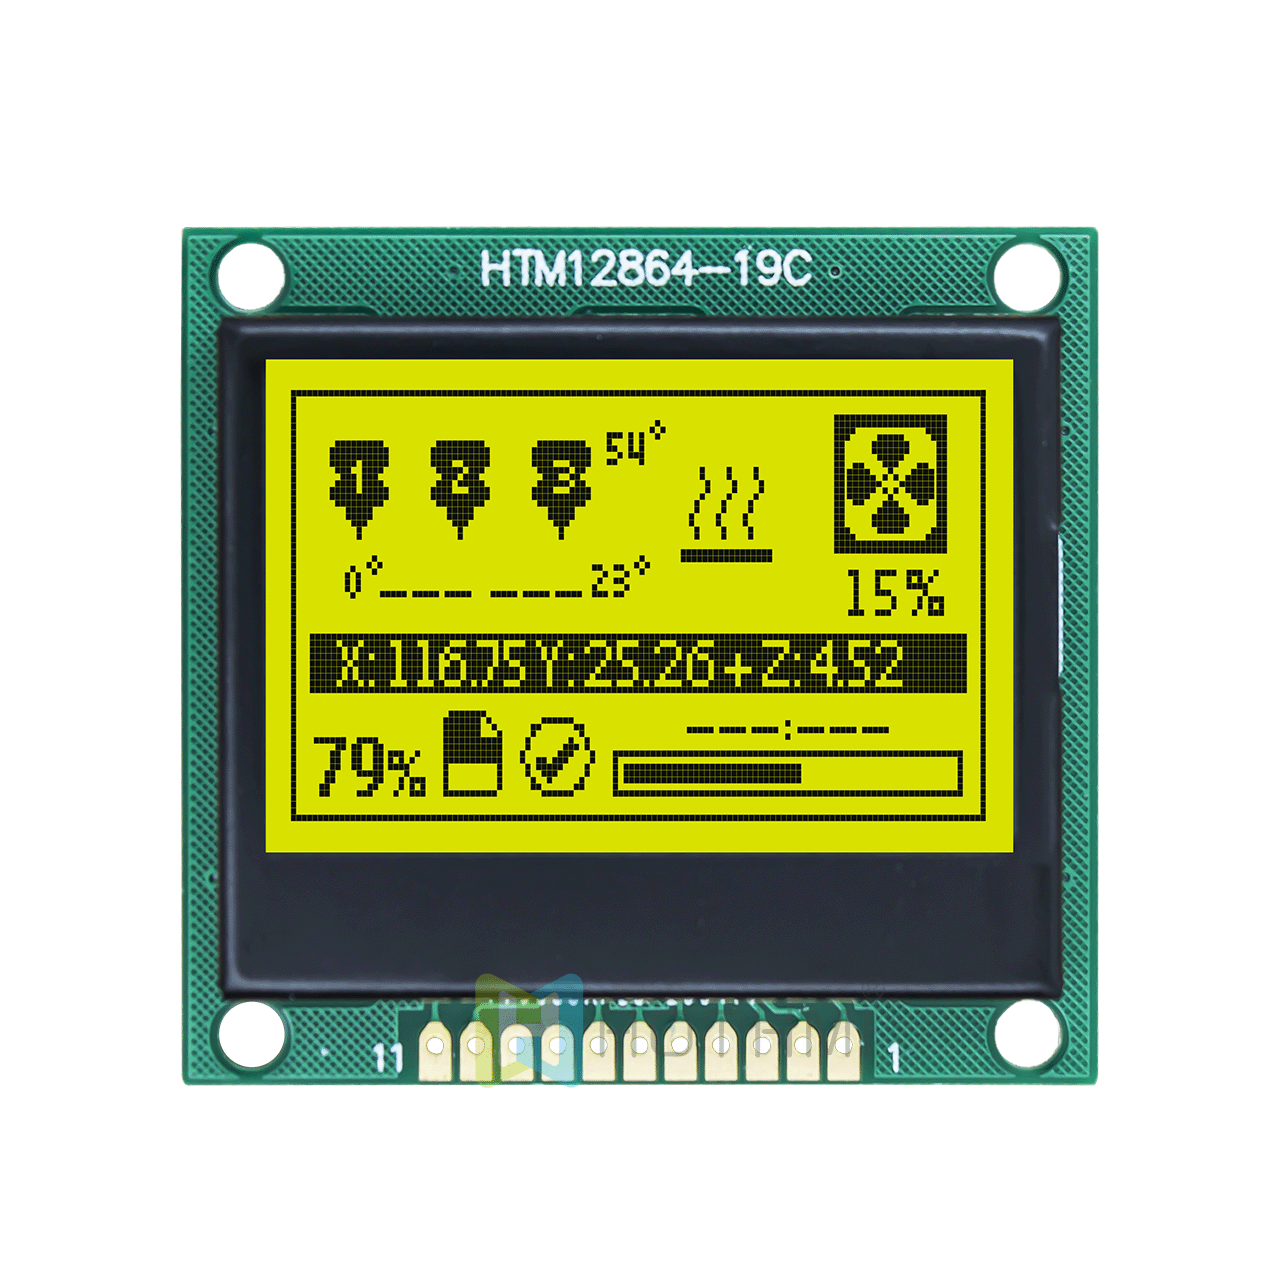 1.7 "128 x 64 LCD graphic display module | 12864 LCD graphic display module | STN positive yellow-green backlight | Adruino